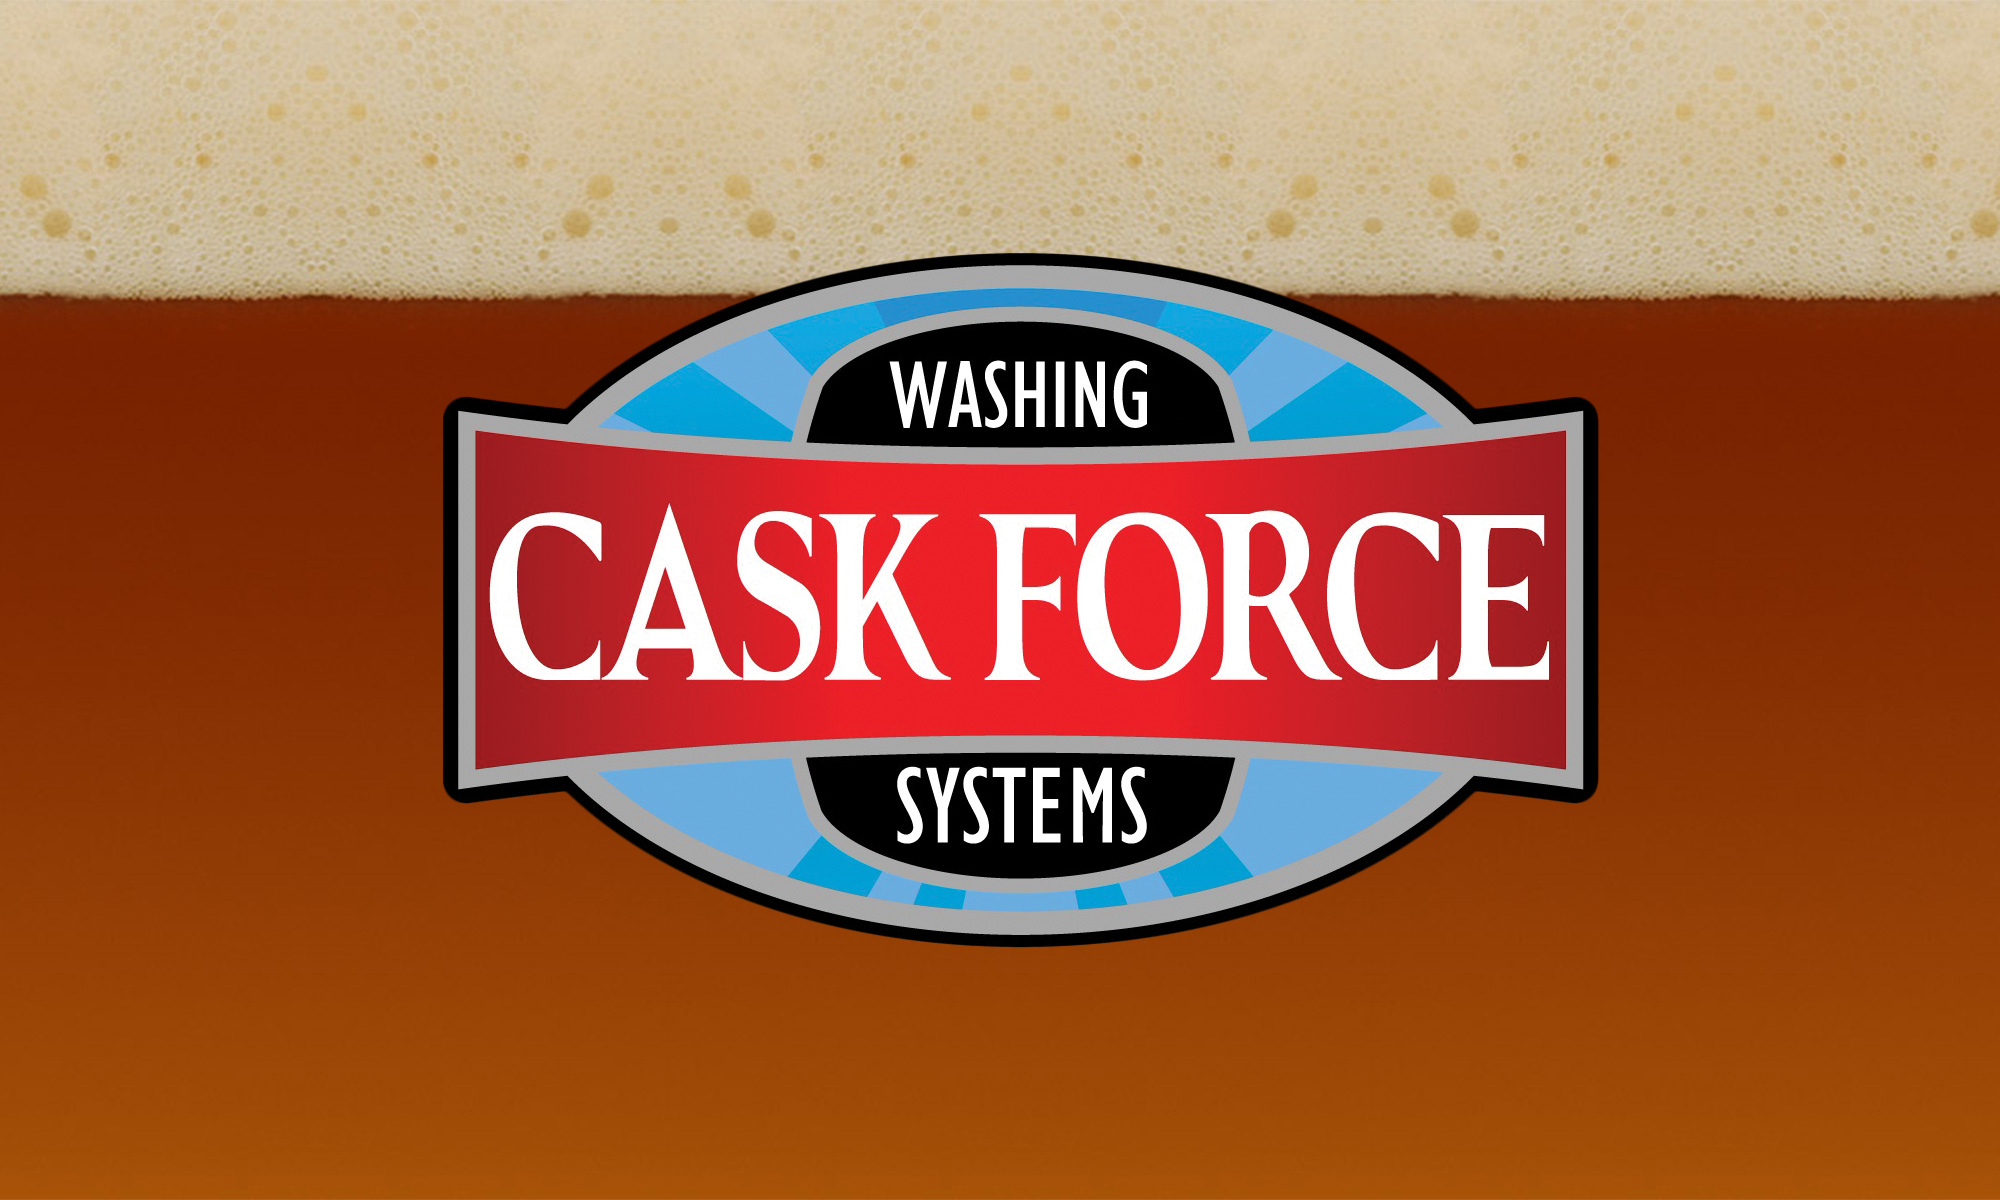 Cask Force and Beer